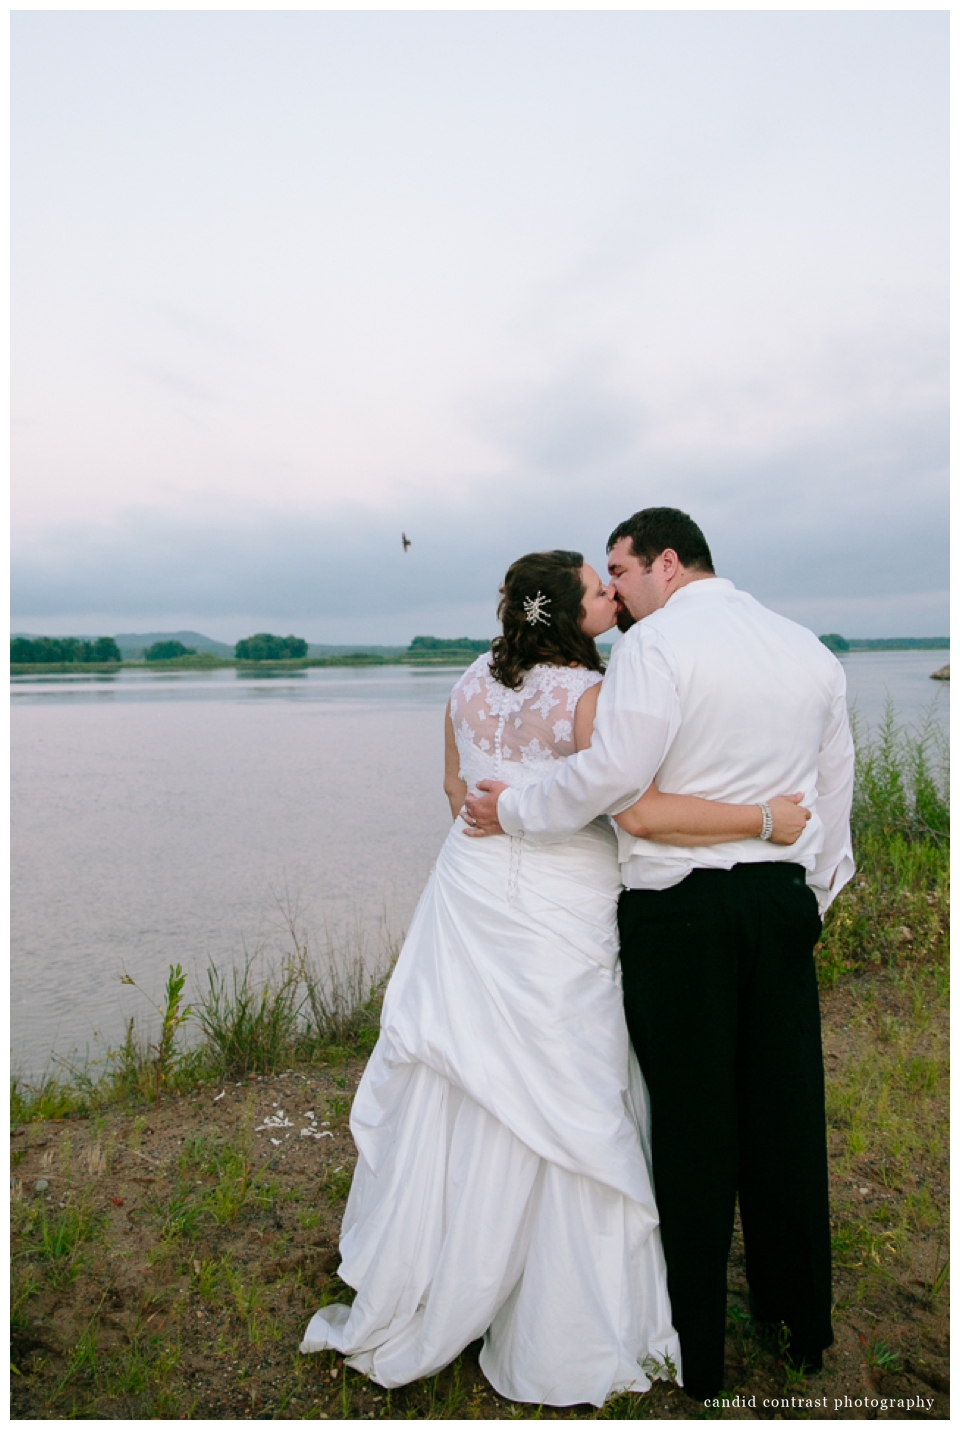 candid contrast photography, bride and groom by mississippi at sunset bellevue ia wedding